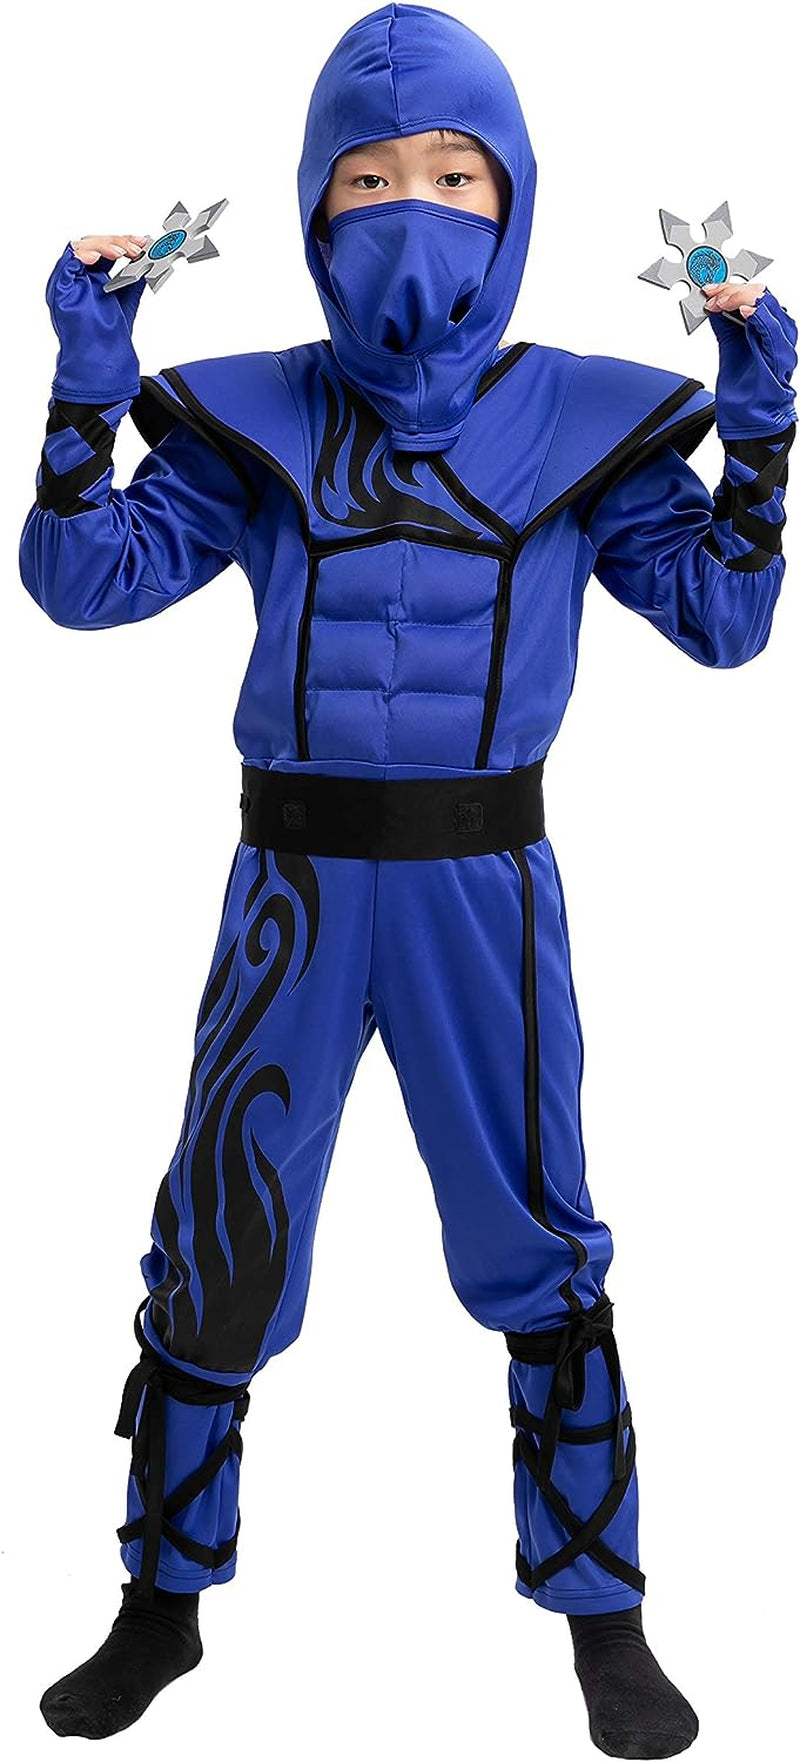 Spooktacular Creations Striking Blue Ninja Costume for Child Stealth Costume Halloween Kids Kung Fu Outfit (Small (5-7 Yr))